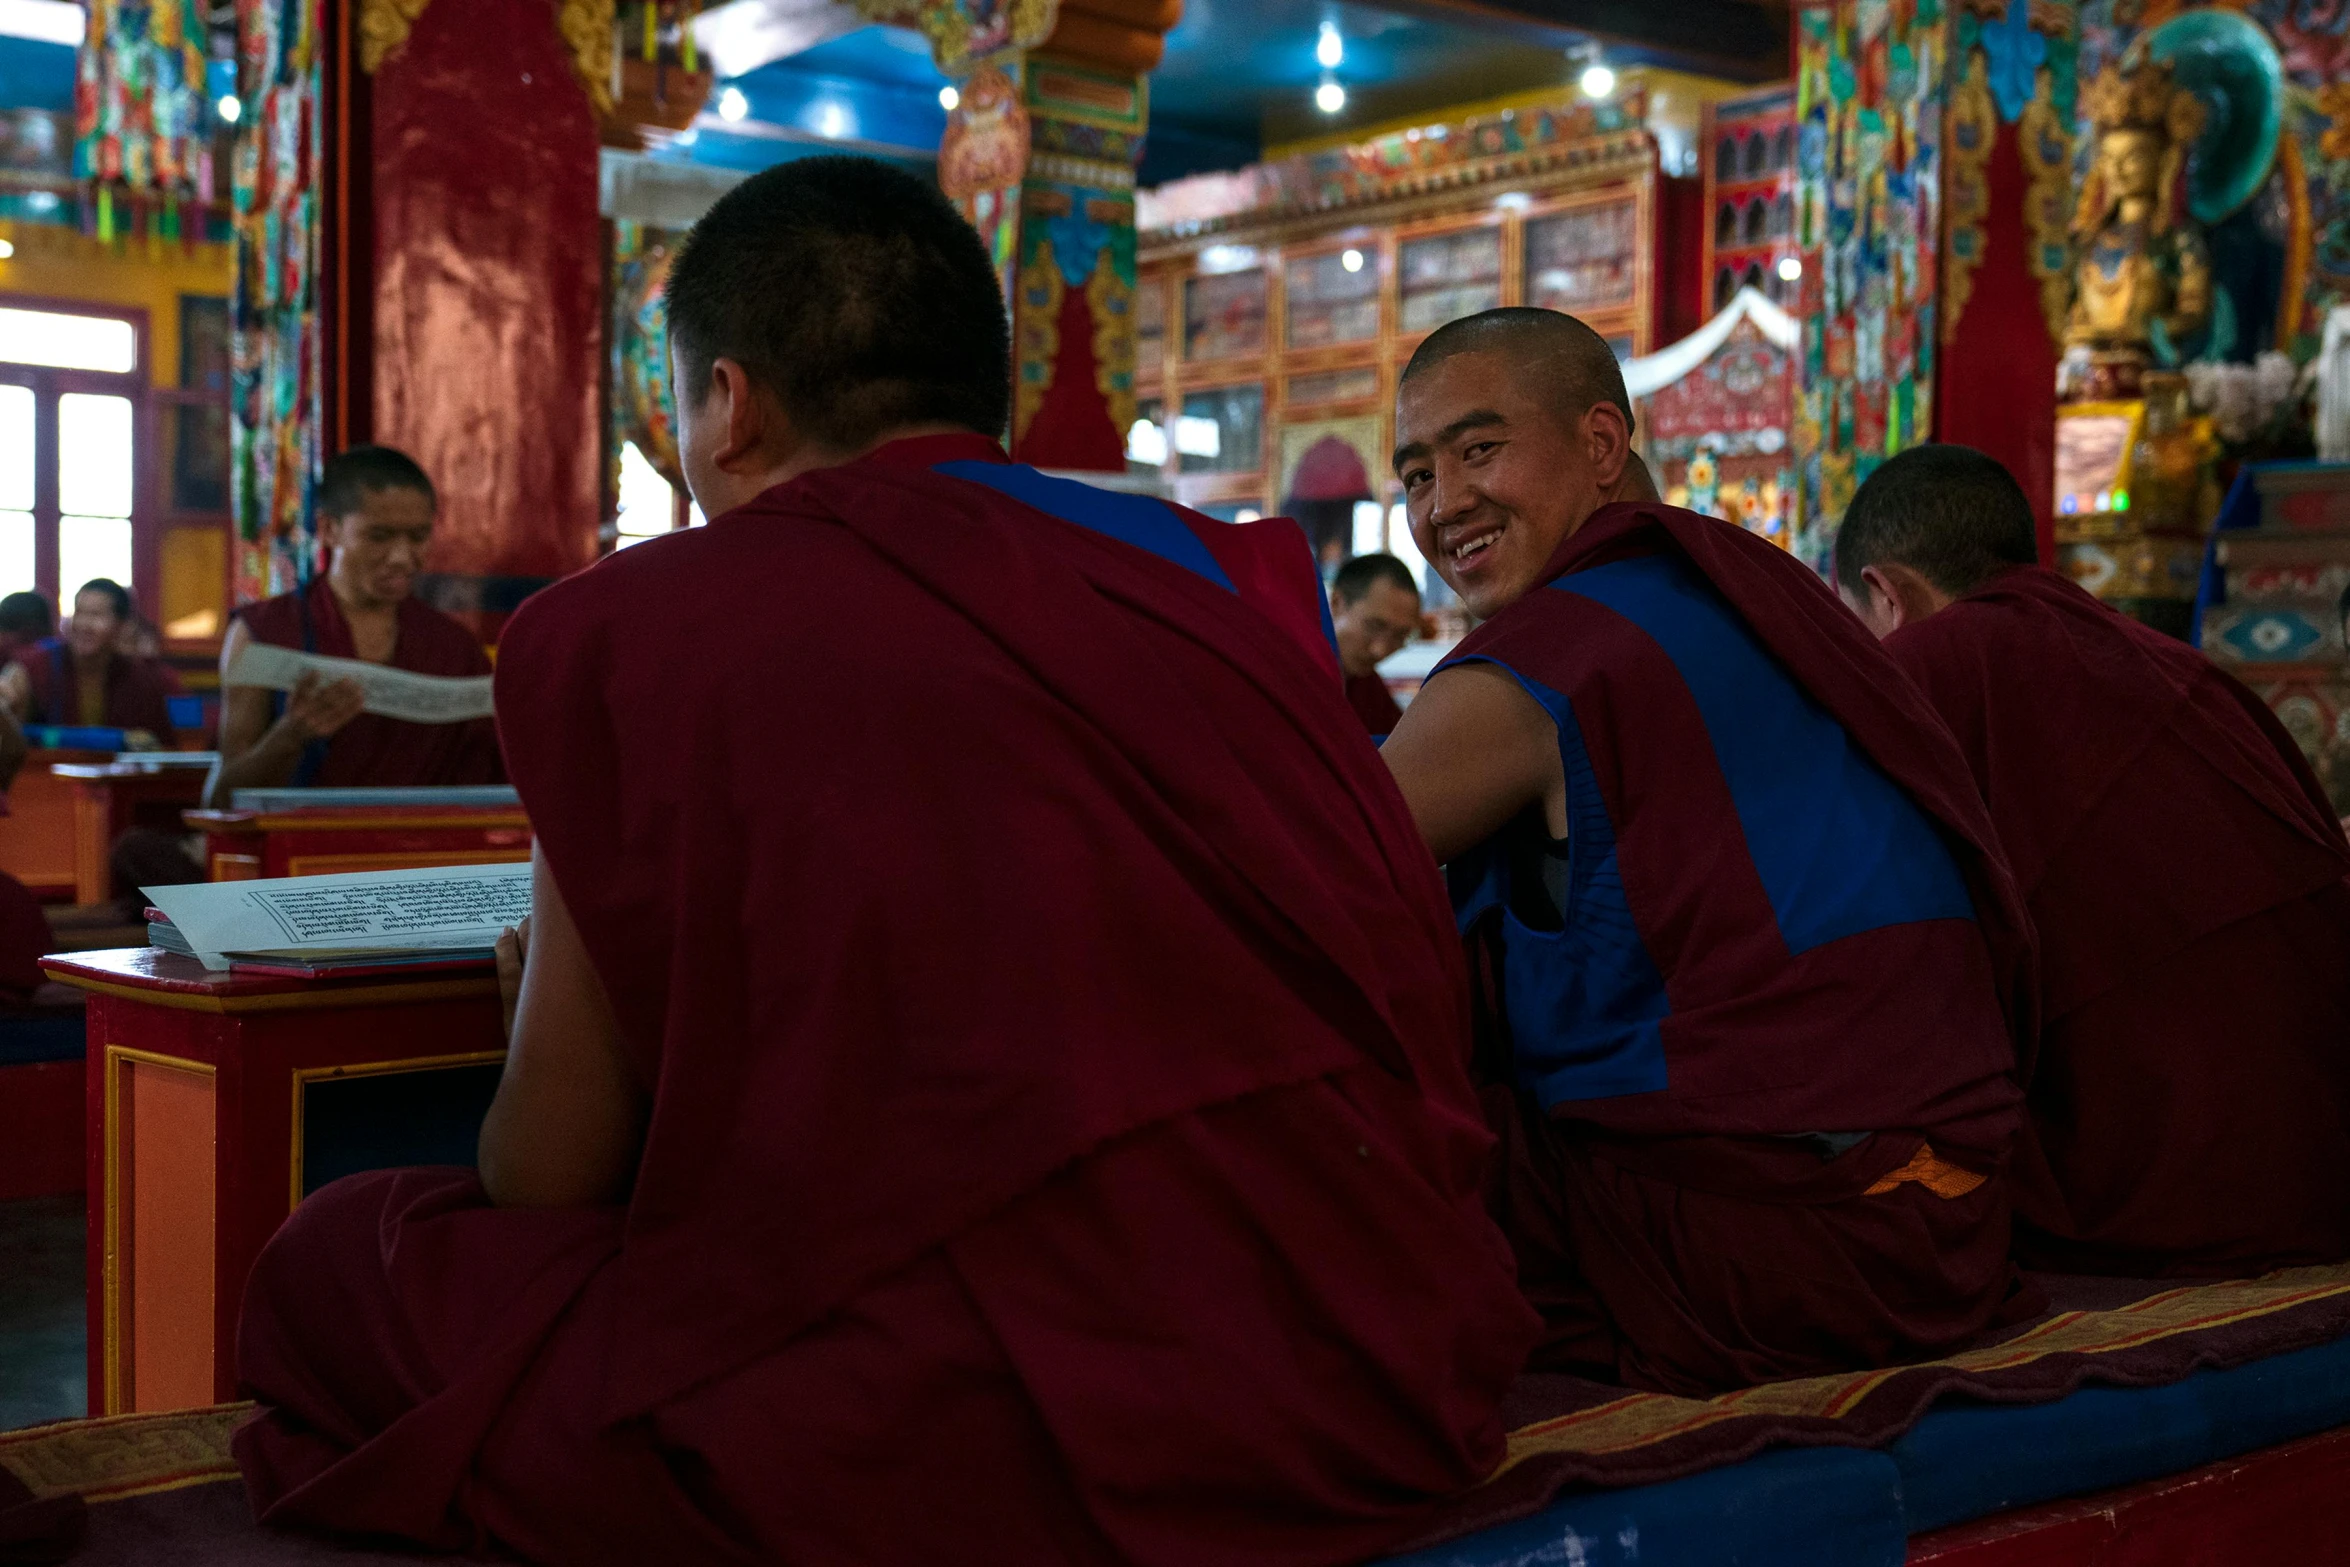 a couple of men sitting next to each other in a room, hurufiyya, monk clothes, red and blue garments, lama, avatar image